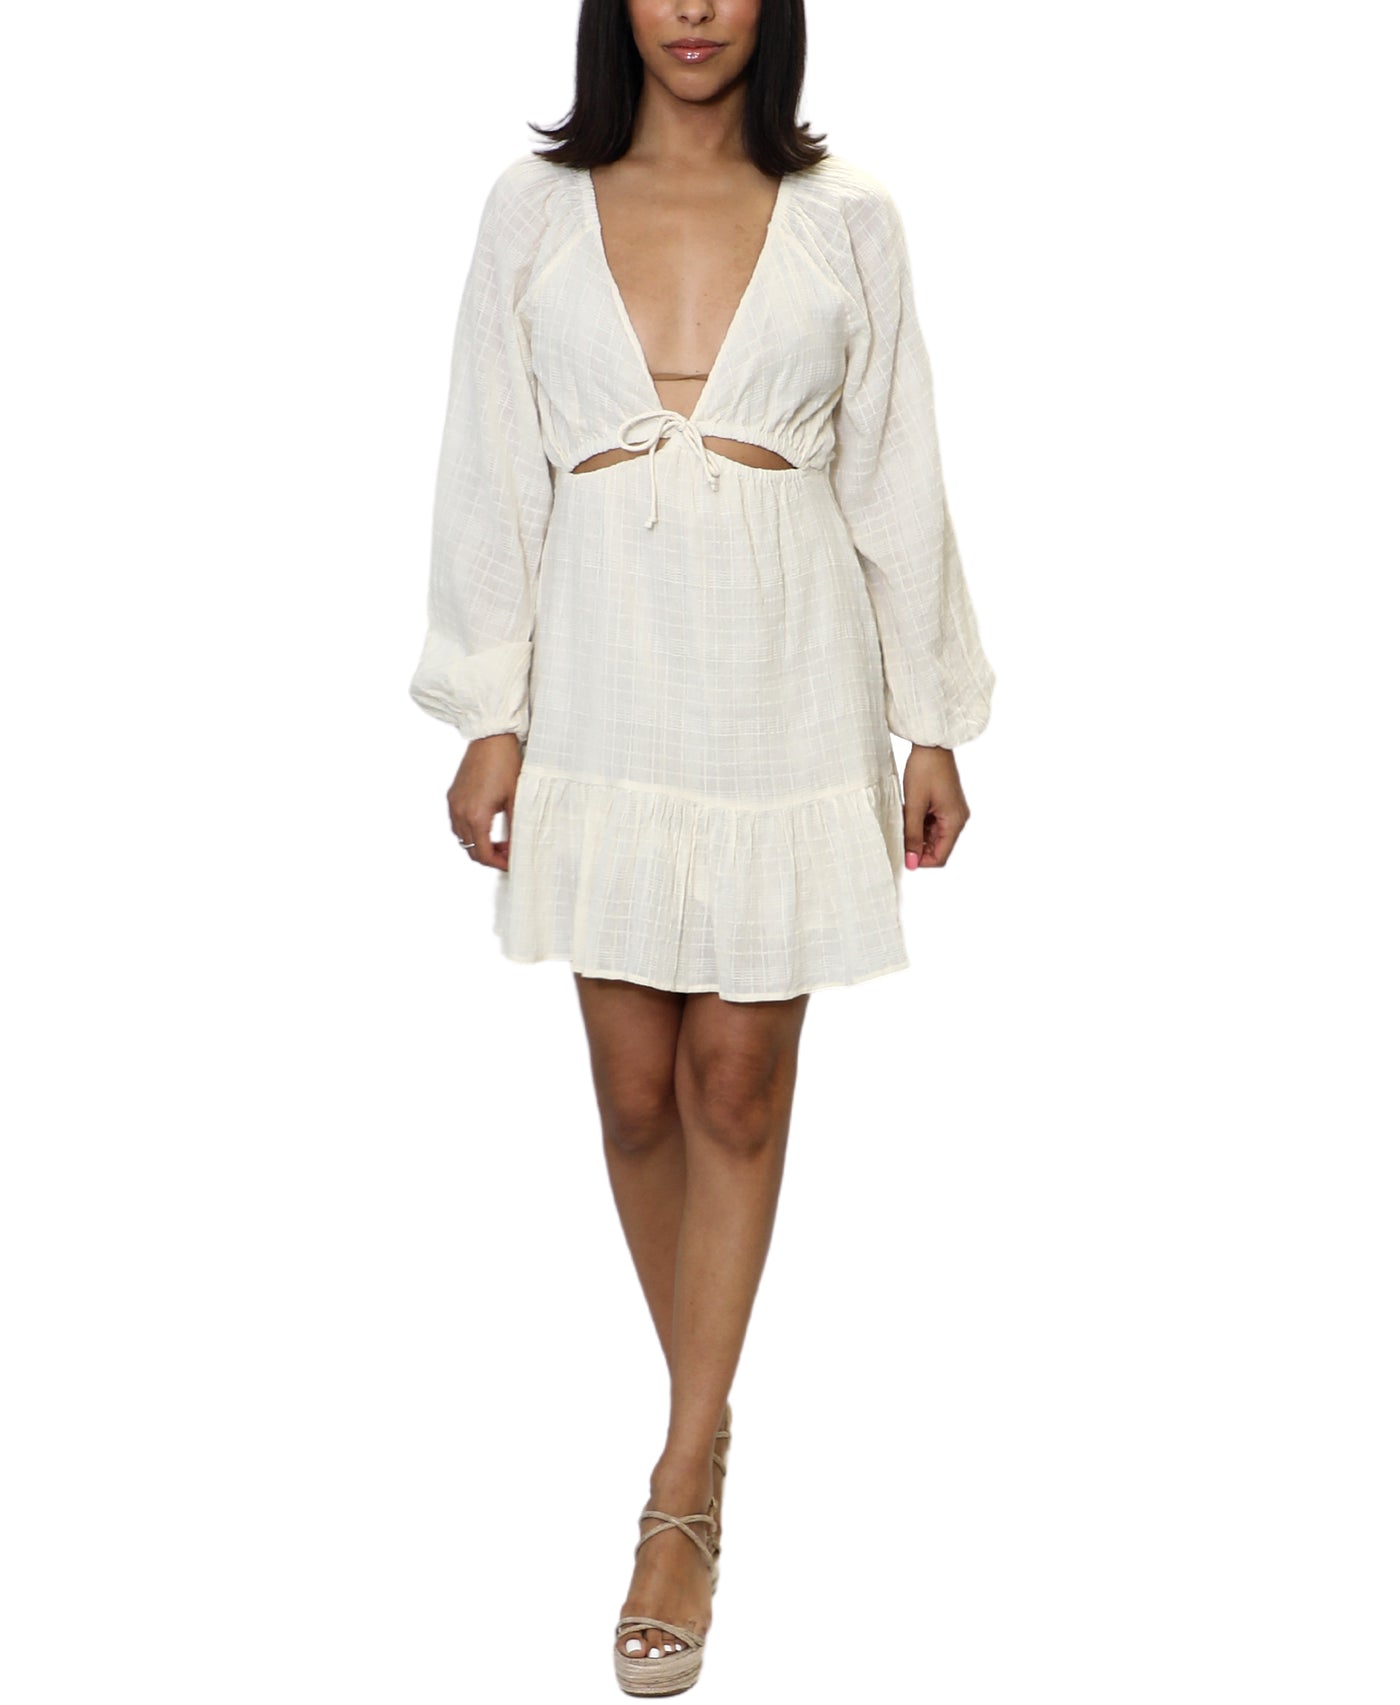 Cut-Out Dress Swim Cover-Up image 1